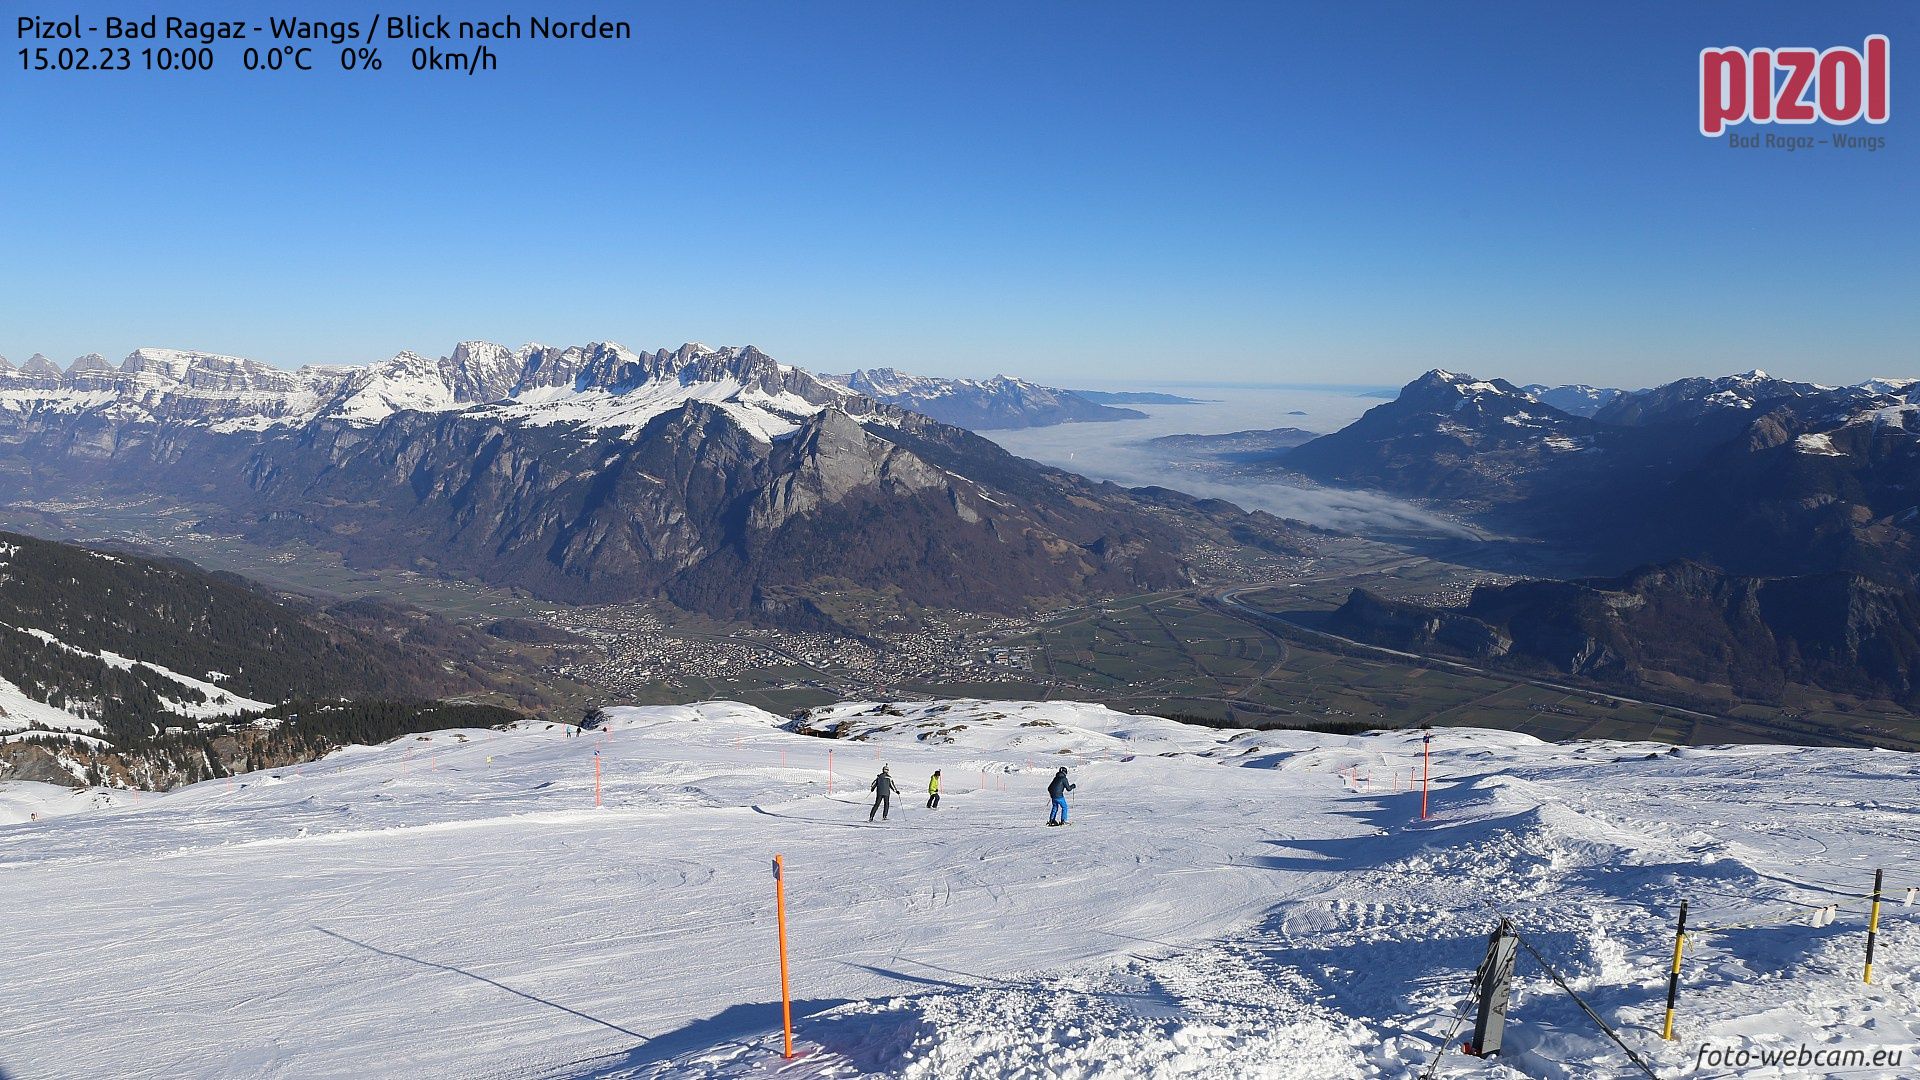 Higher up, lots of sun with some clouds on the alpine foreland (foto-webcam.eu)